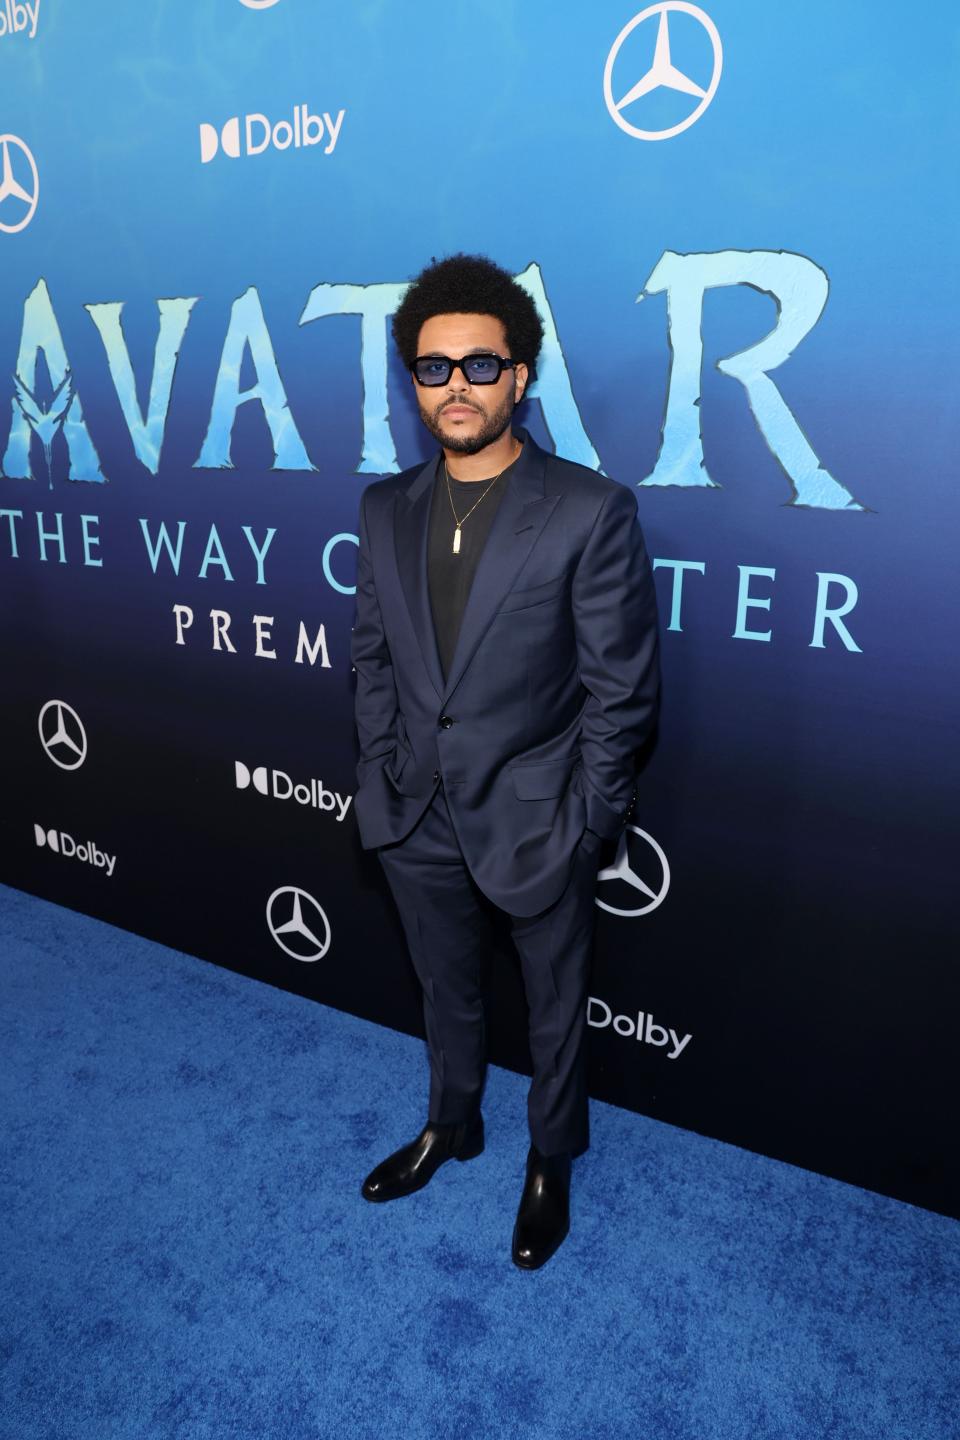 The Weeknd at 'Avatar' premier wearing blue suit.